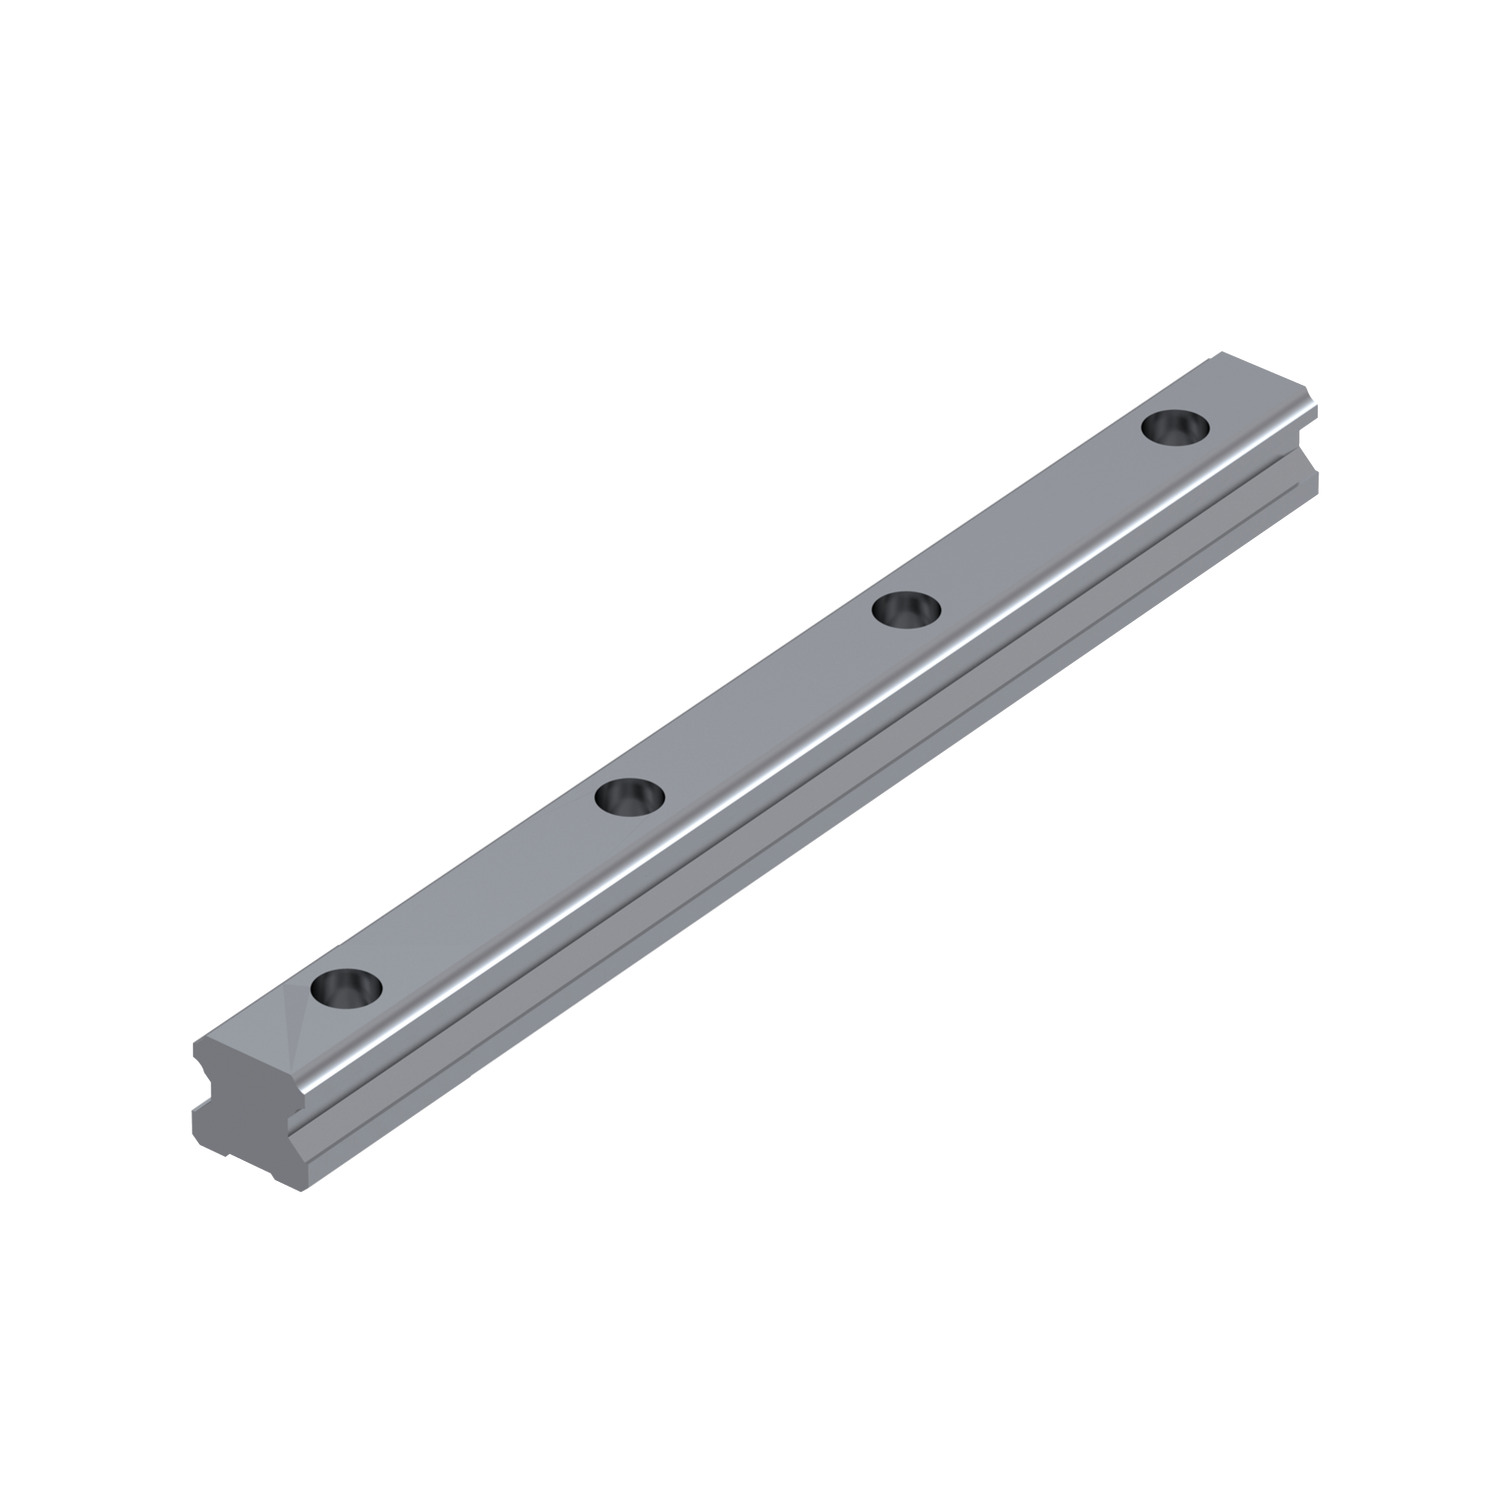 Linear Guideways Our popular linear rail systems with either flanged or unflanged carriages, widths 15, 20, 25, 30, 35, 45 and 55mm, and lengths up to 4 metres. Rear-fixing rails or ultra-low profile carriages also available.